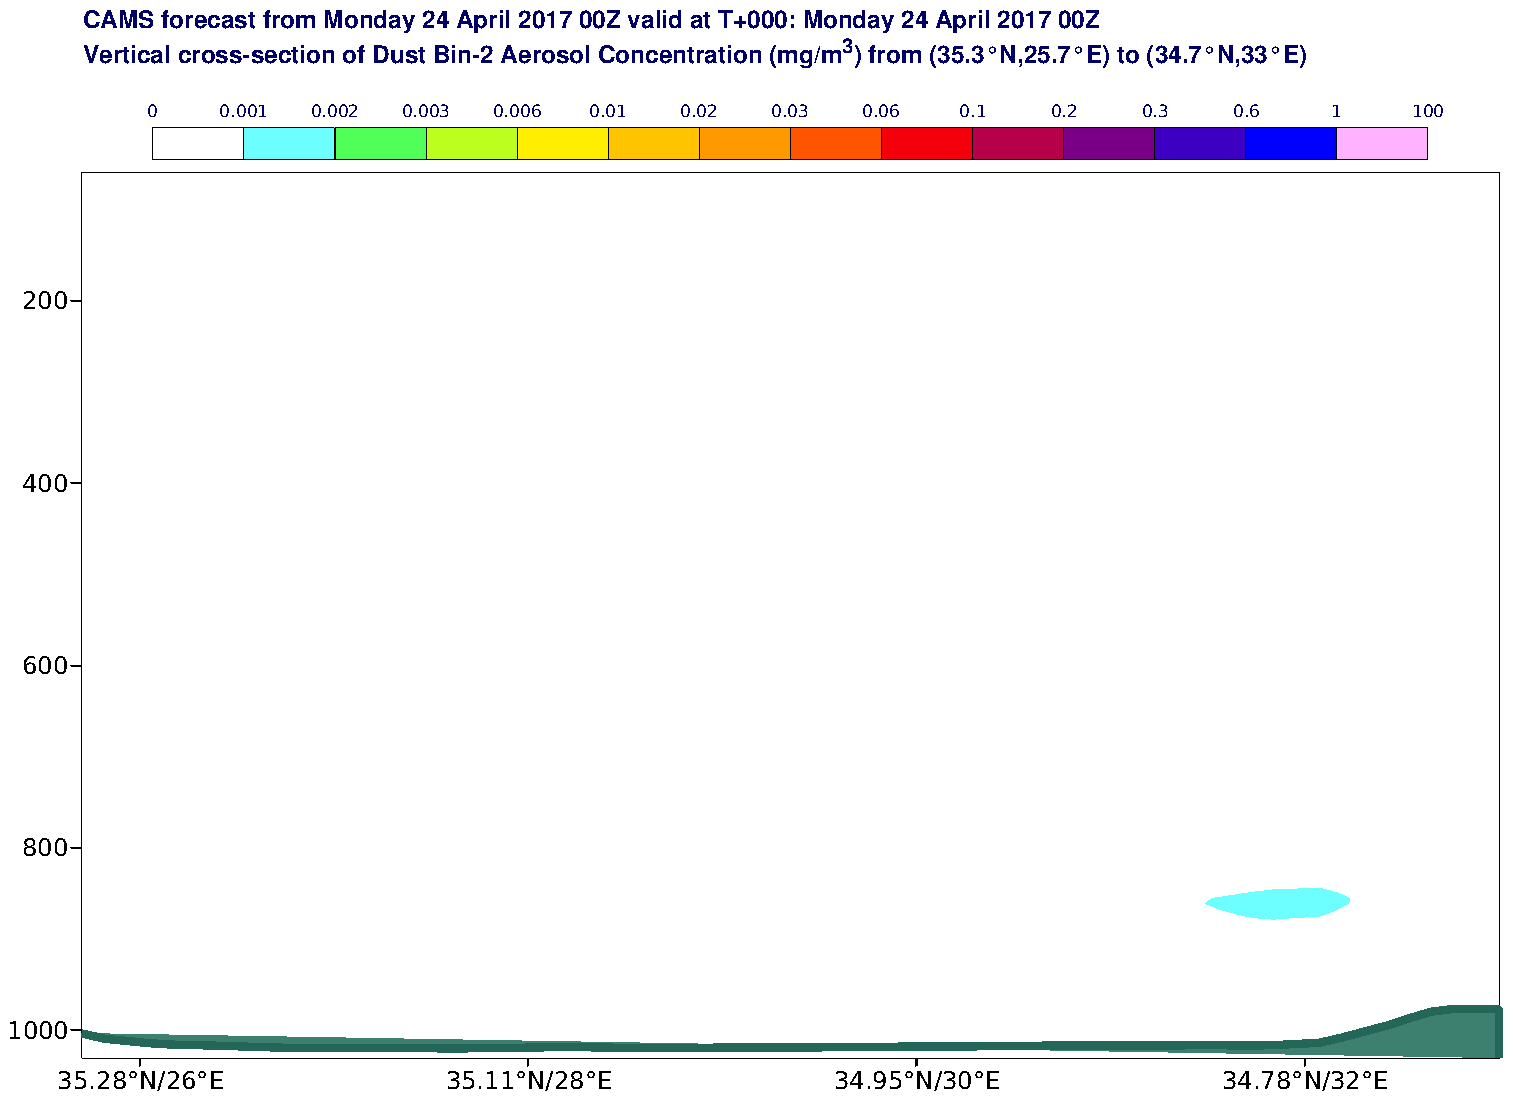 Vertical cross-section of Dust Bin-2 Aerosol Concentration (mg/m3) valid at T0 - 2017-04-24 00:00